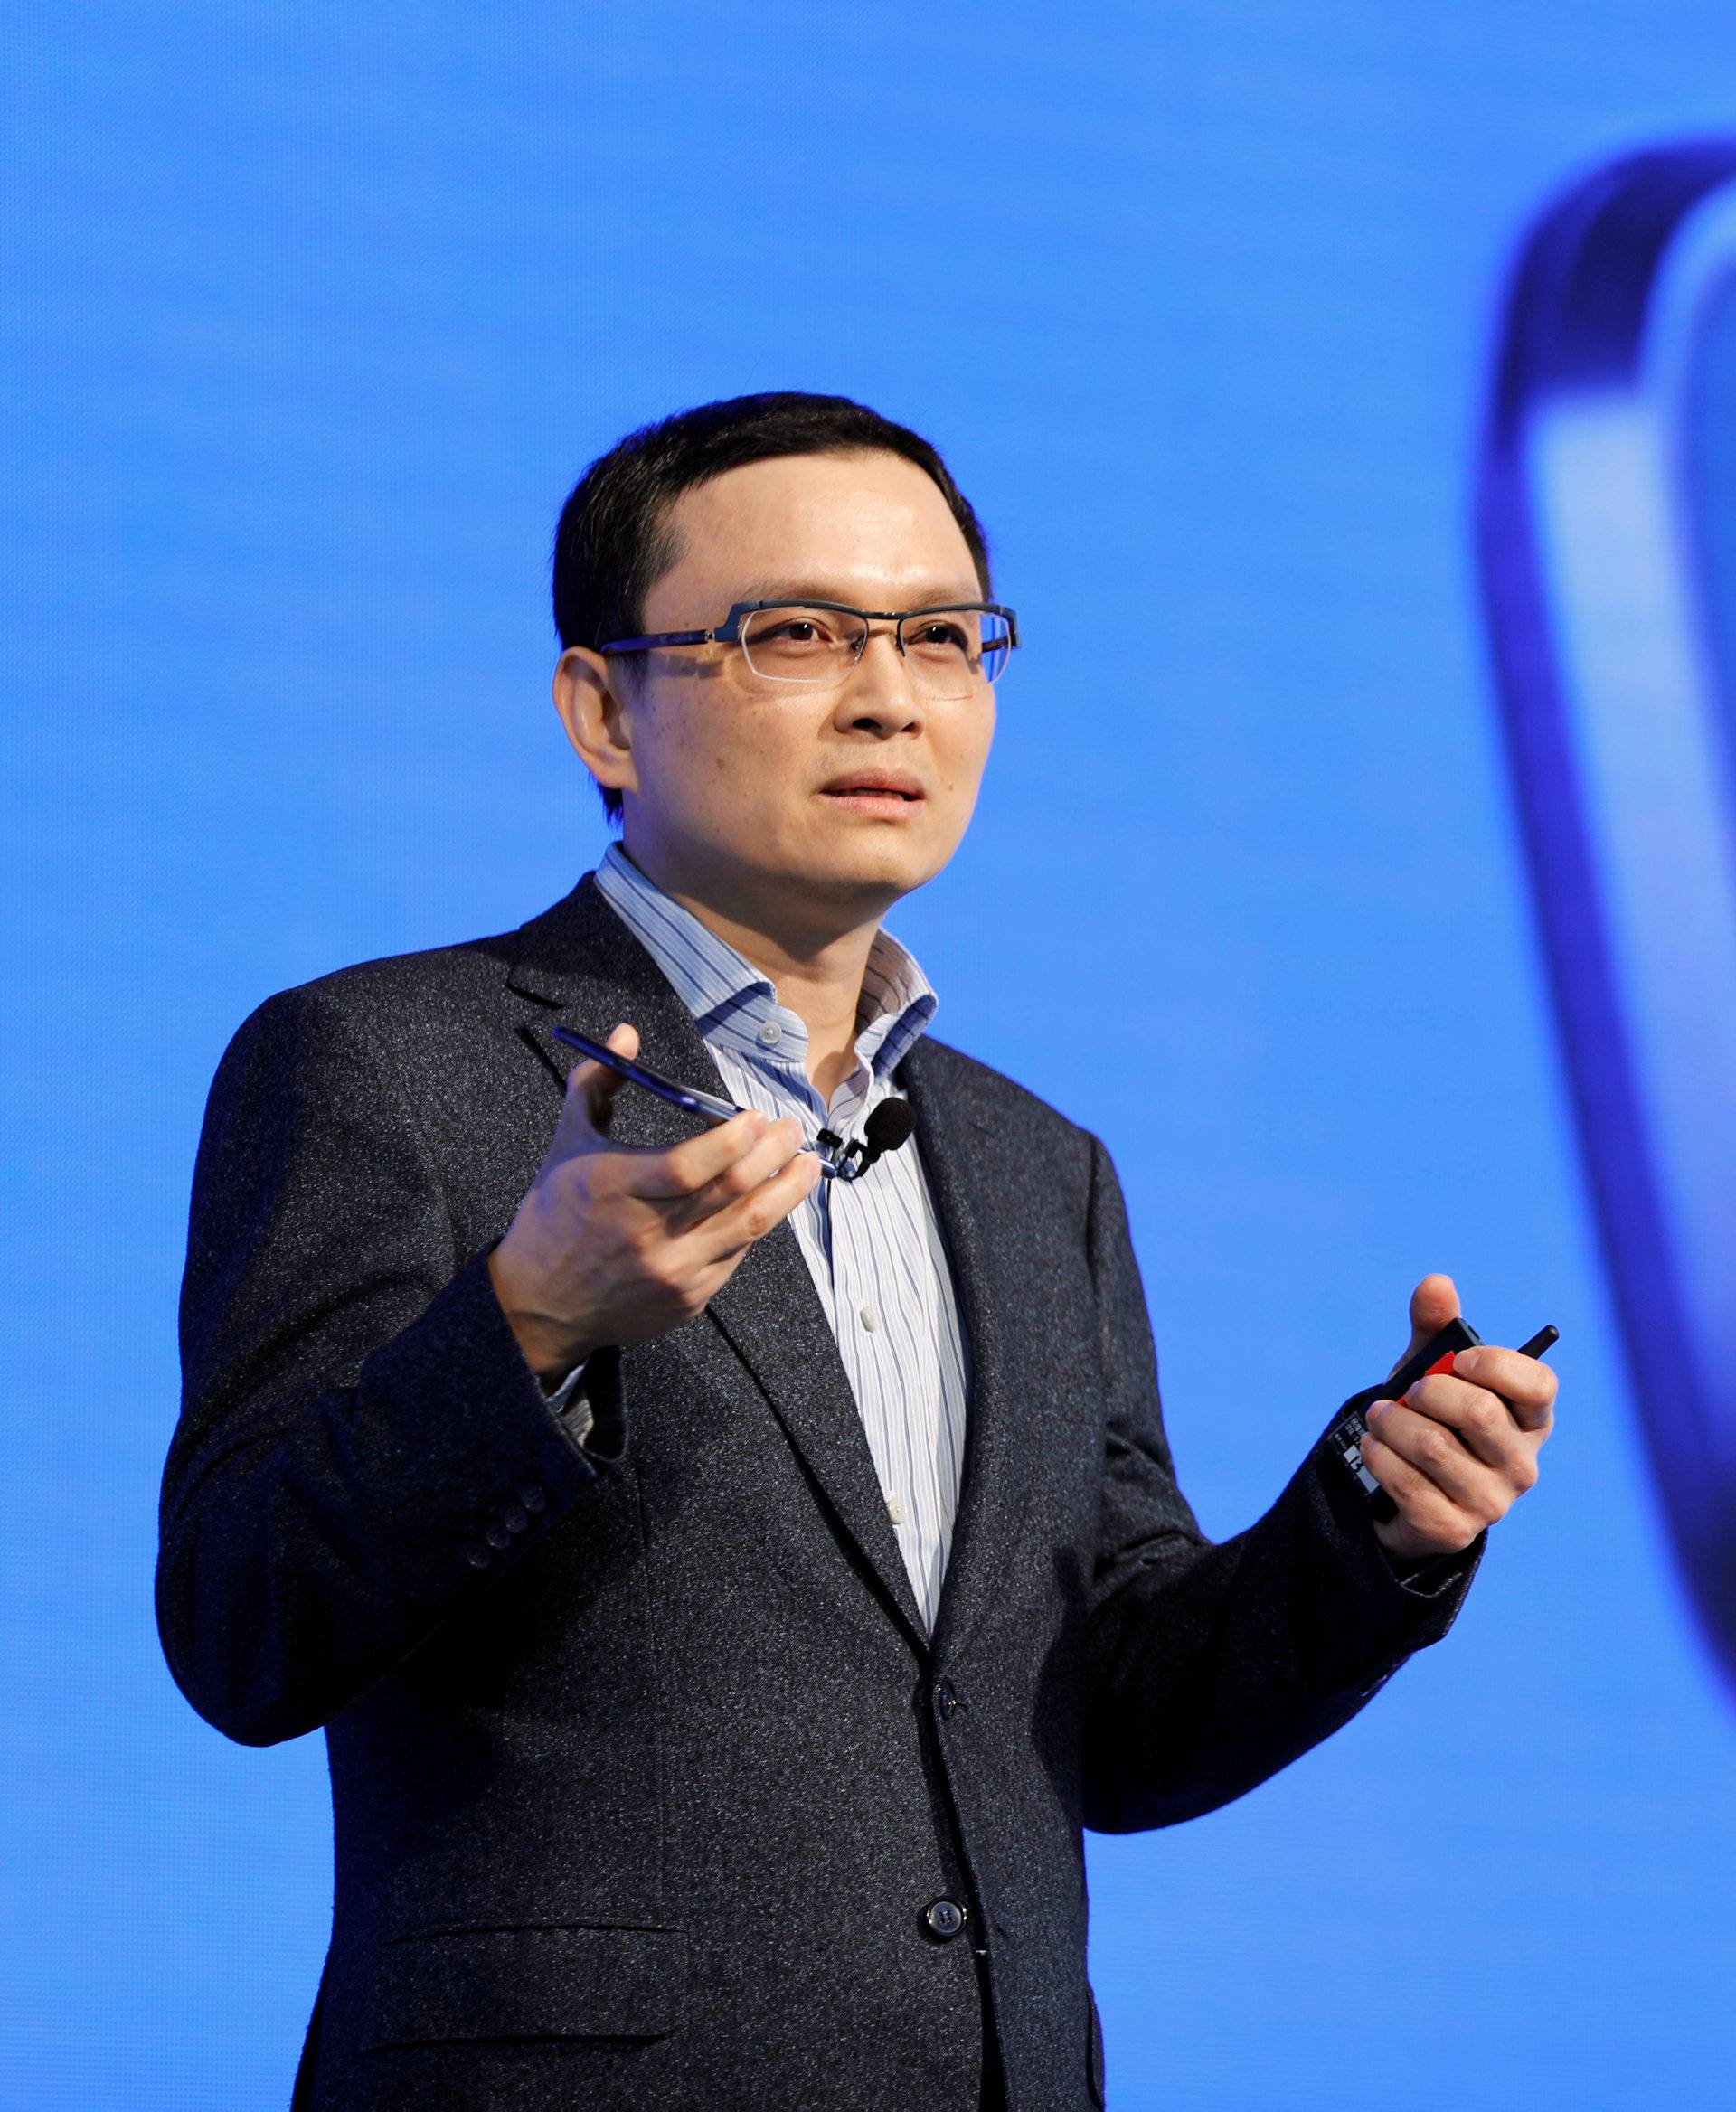 Chang Chia-Lin, President of Global Sales of HTC speaks holding a new smartphone "U Ultra" during its launch event in Taipei